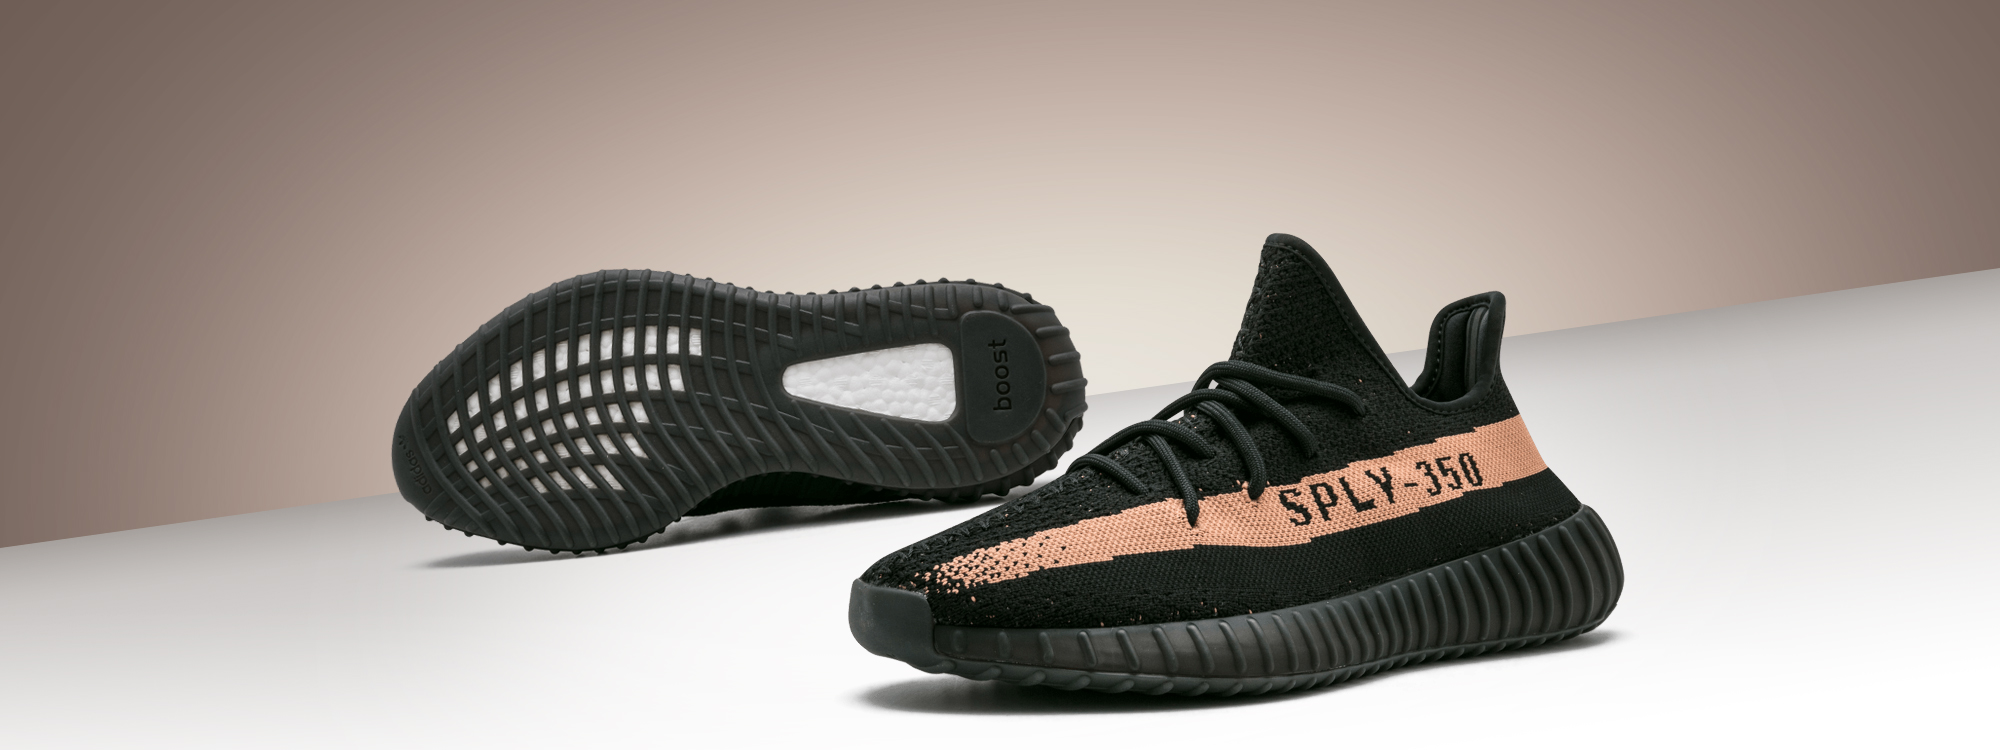  Yeezy Boost 350 V2 Copper kids outfit